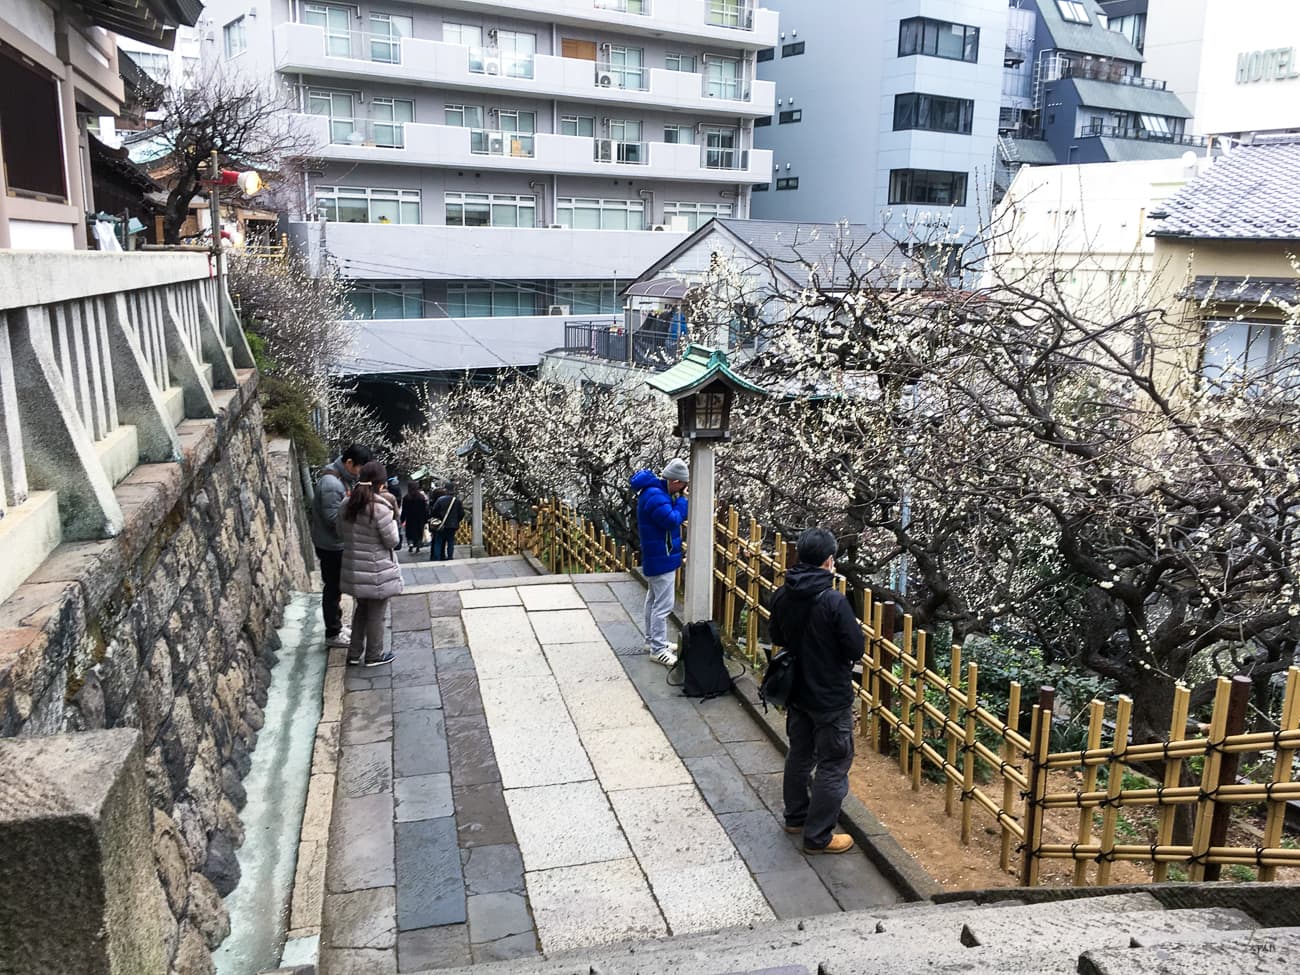 A picturesque staircase lined with plum trees